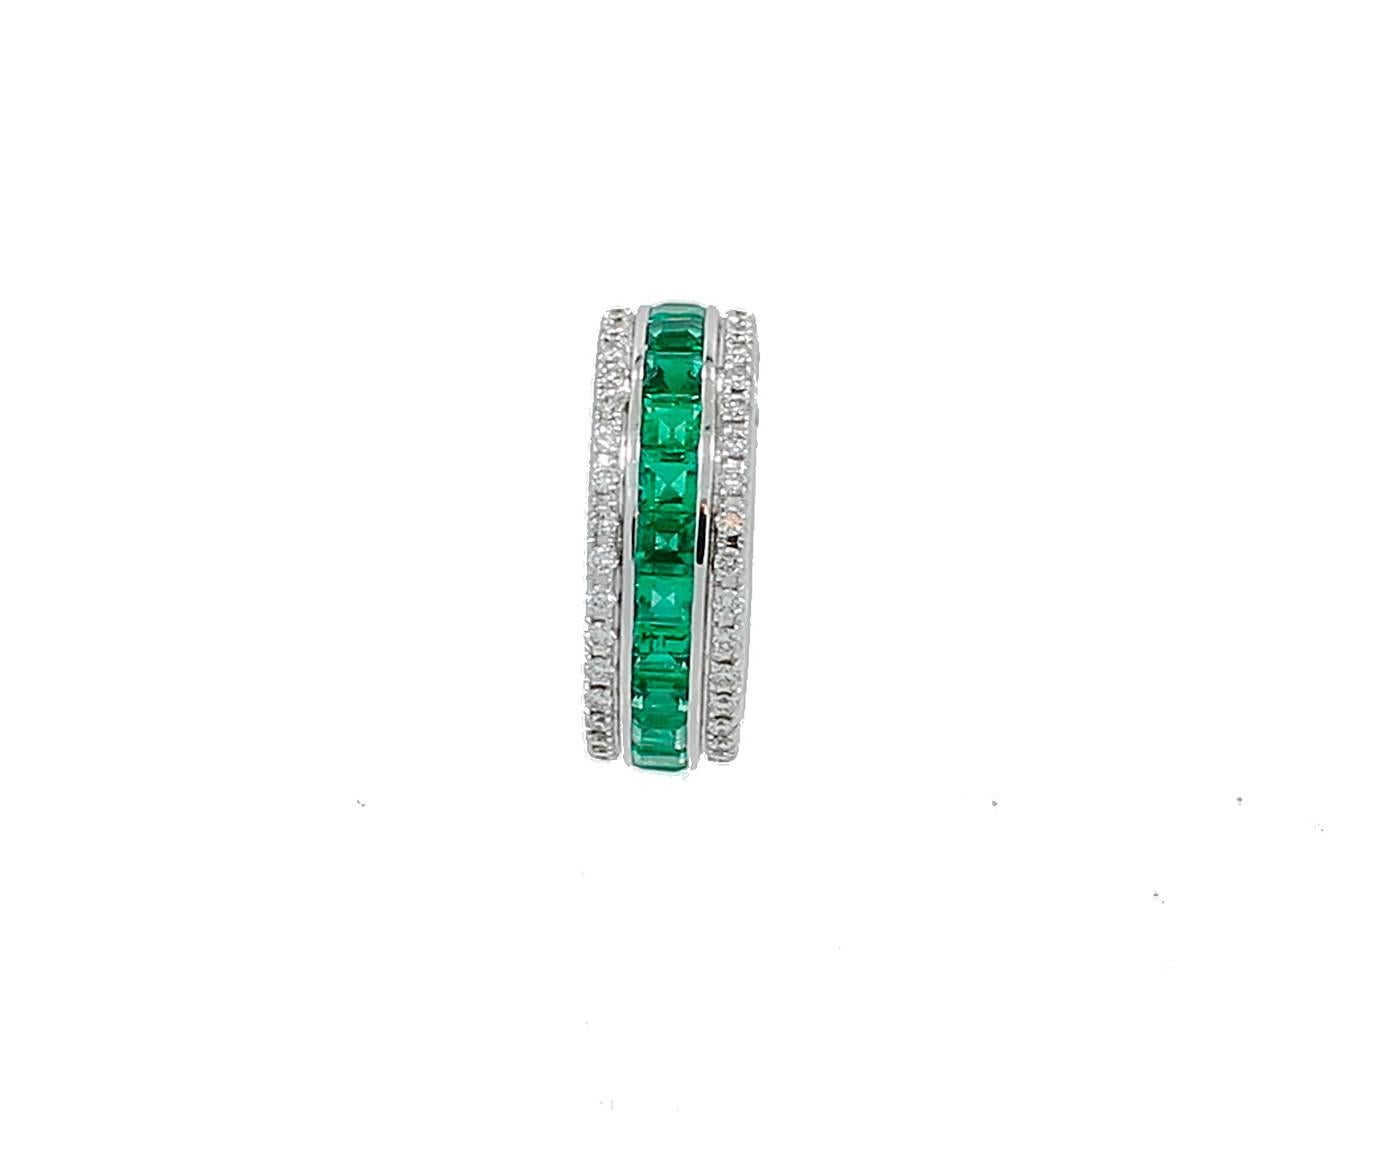 18K White Gold Band with 24 French Cut Emeralds weighing a total of 3.09ct and 72 Round Brilliant Cut Diamonds weighing a total of .66ct G-H in color and VS2-SI1 in clarity. The band is a size 6 1/2. Beautifully made band.